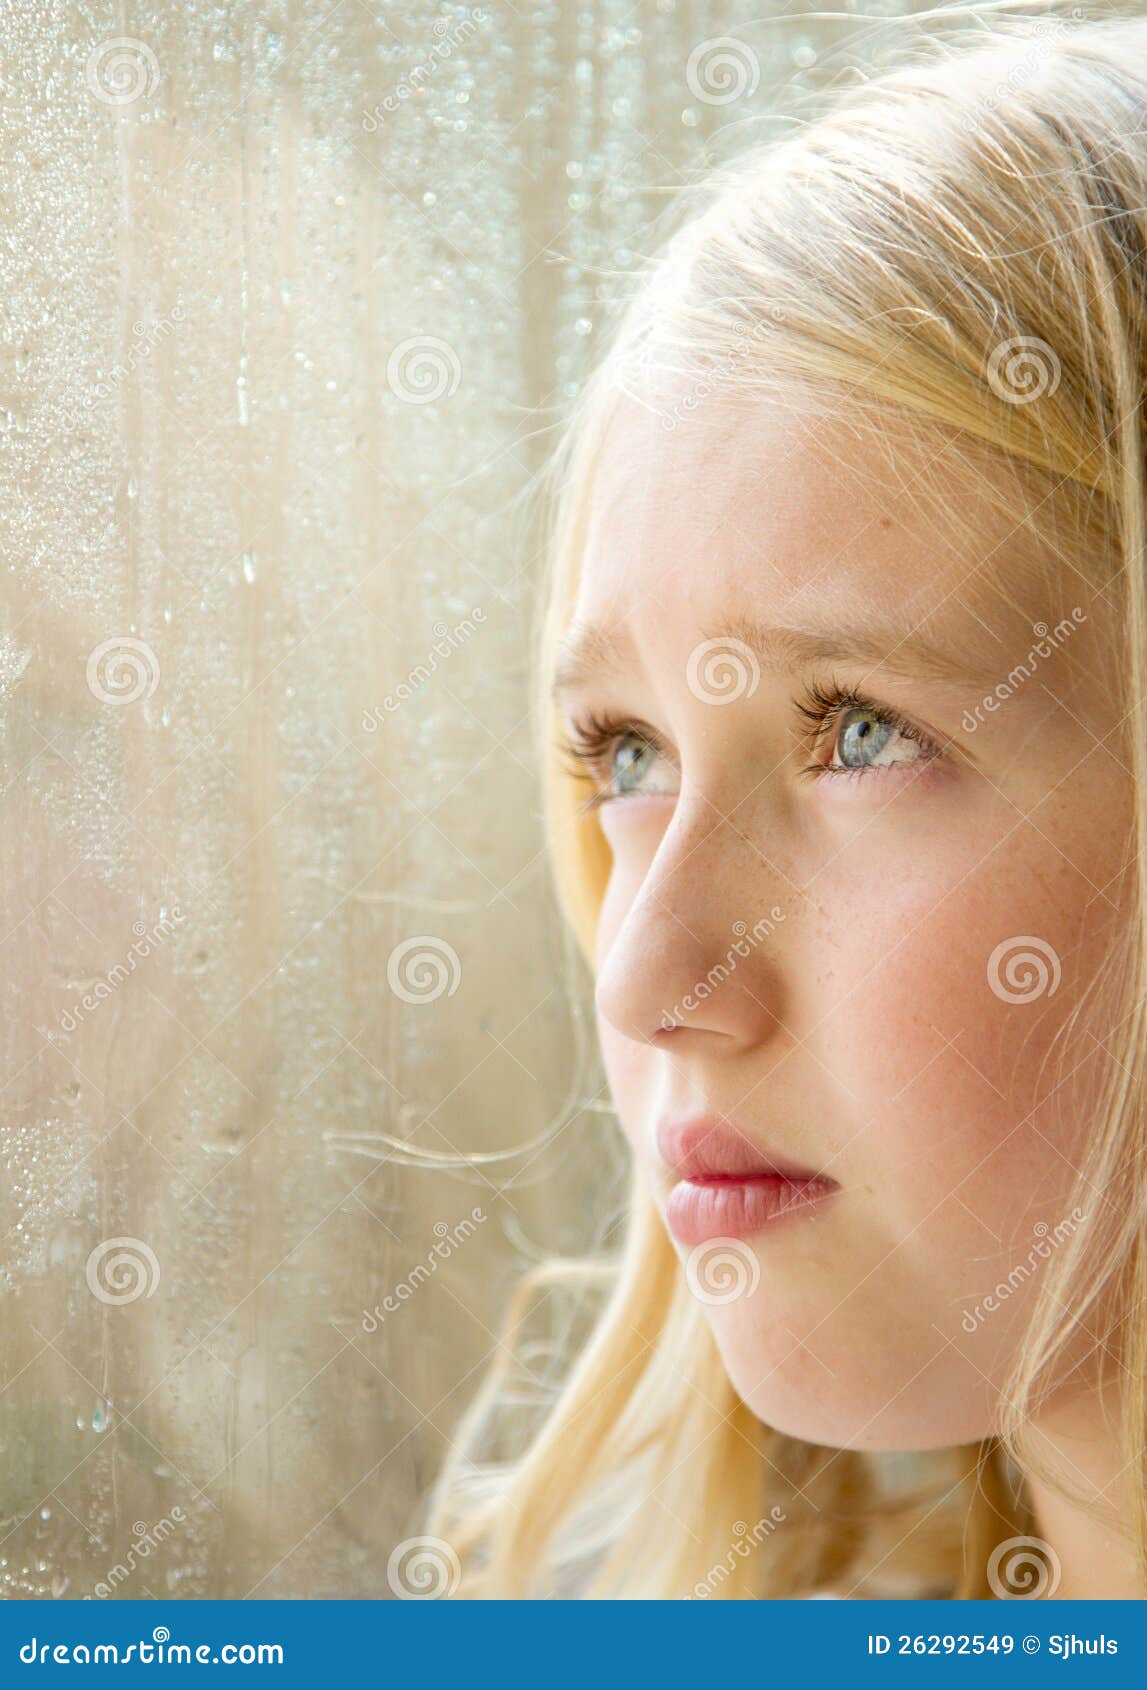 Closeup Of A Teen Looking Out A Window Stock Image Imag